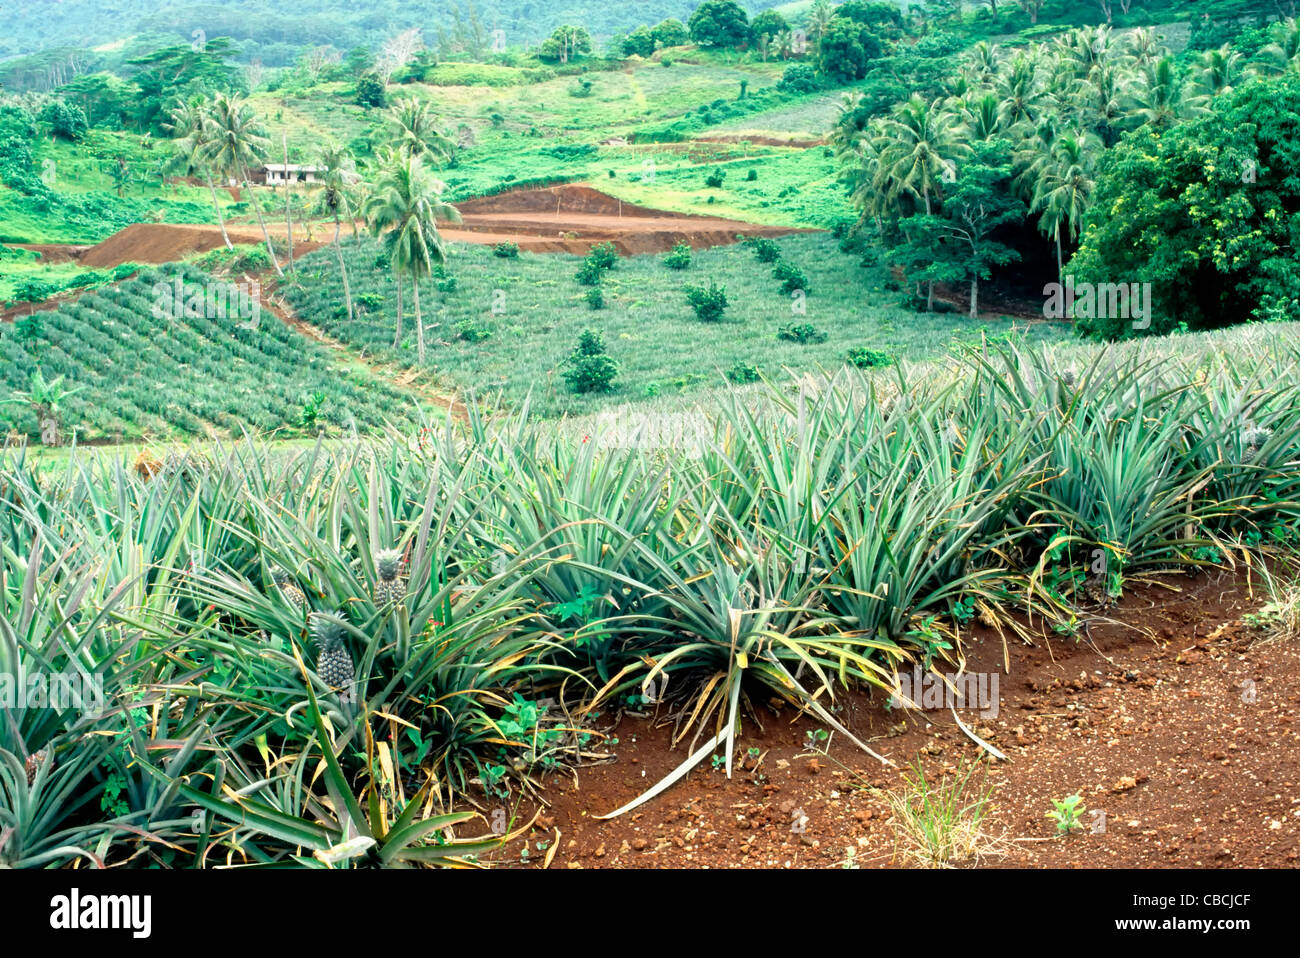 View of pineapple plantation, coffee in background. Stock Photo